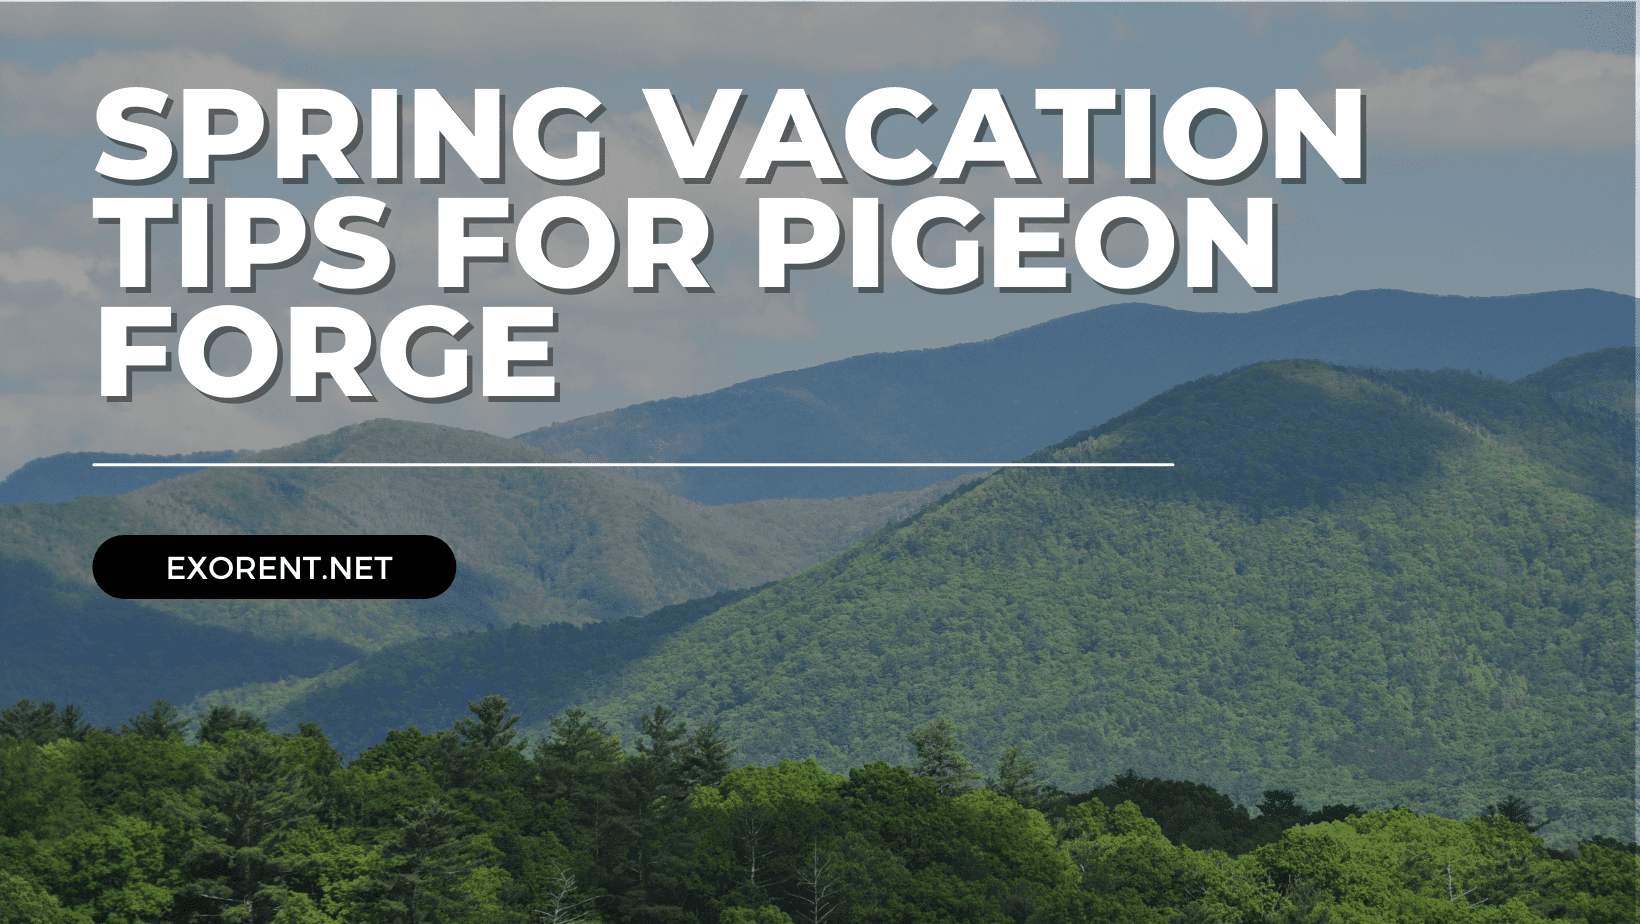 Spring Vacation Tips for Pigeon Forge